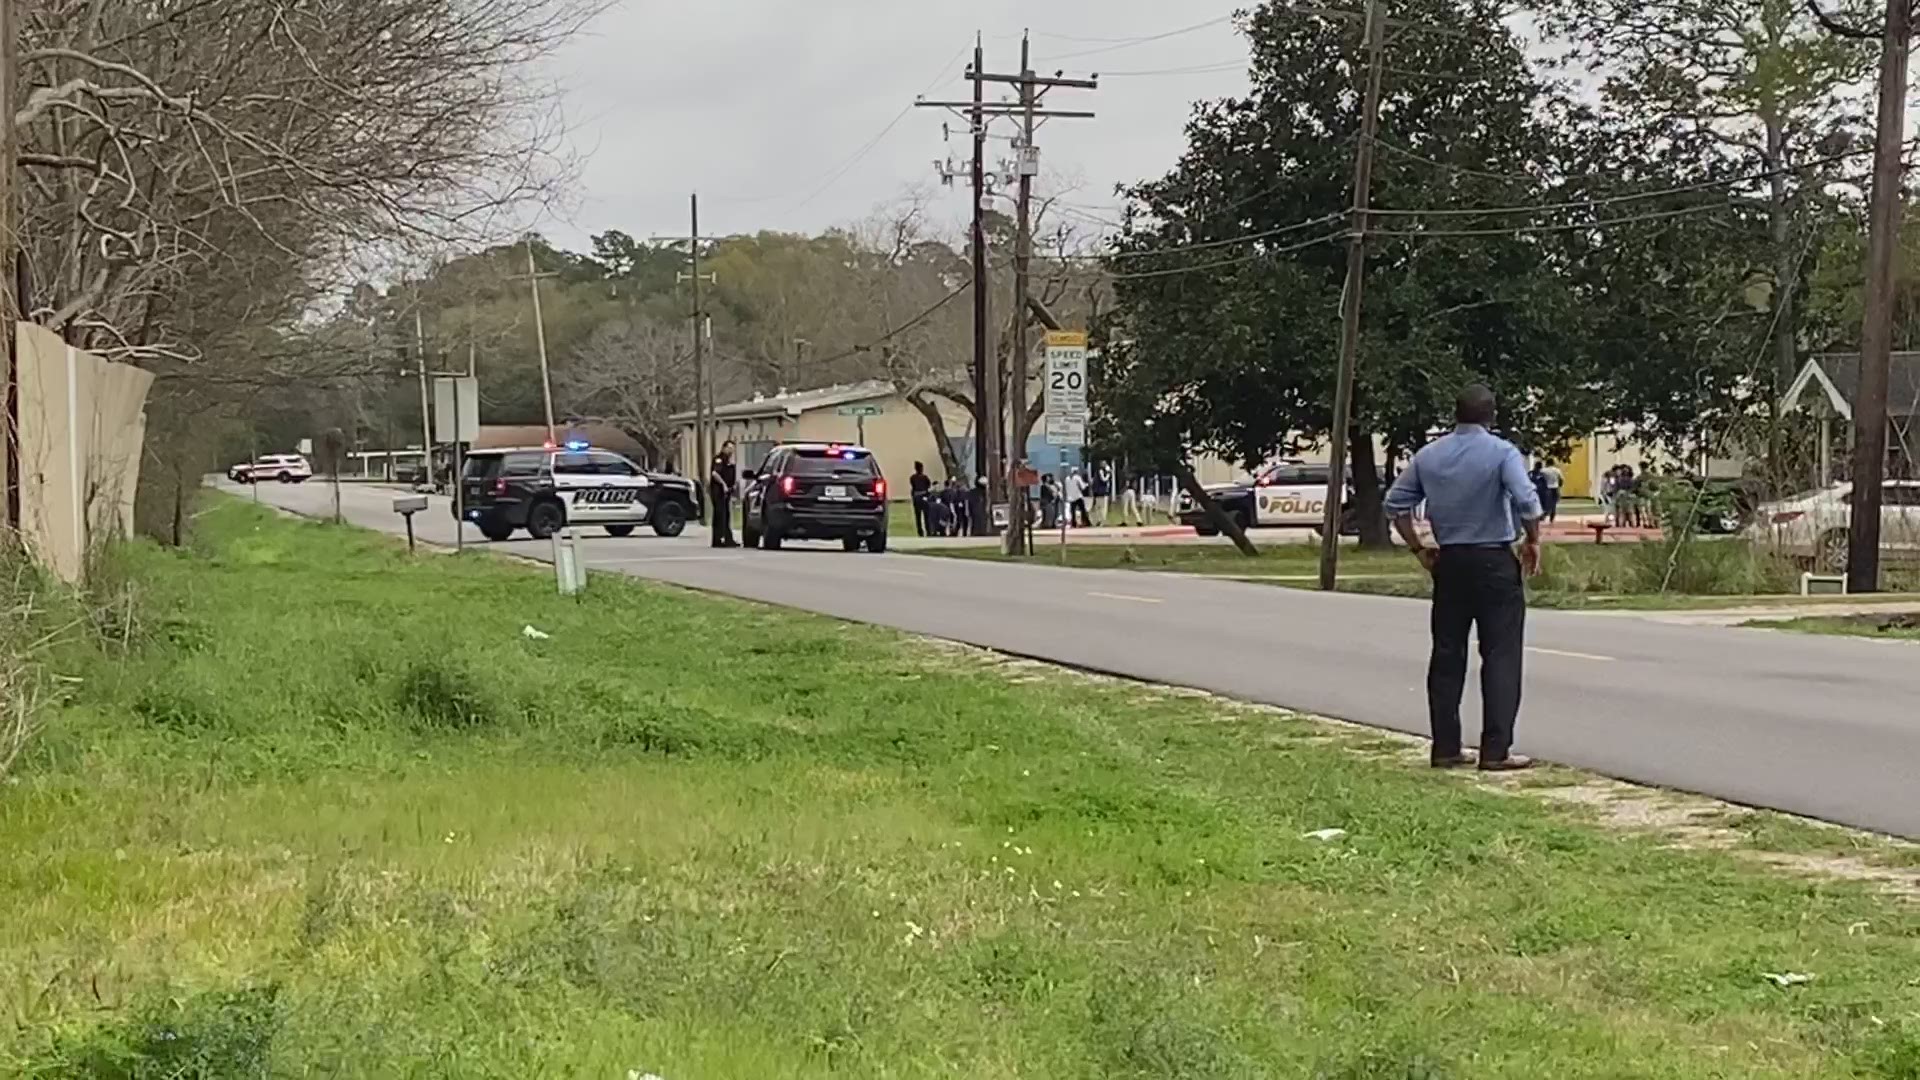 A Beaumont ISD spokesperson said the students were evacuated